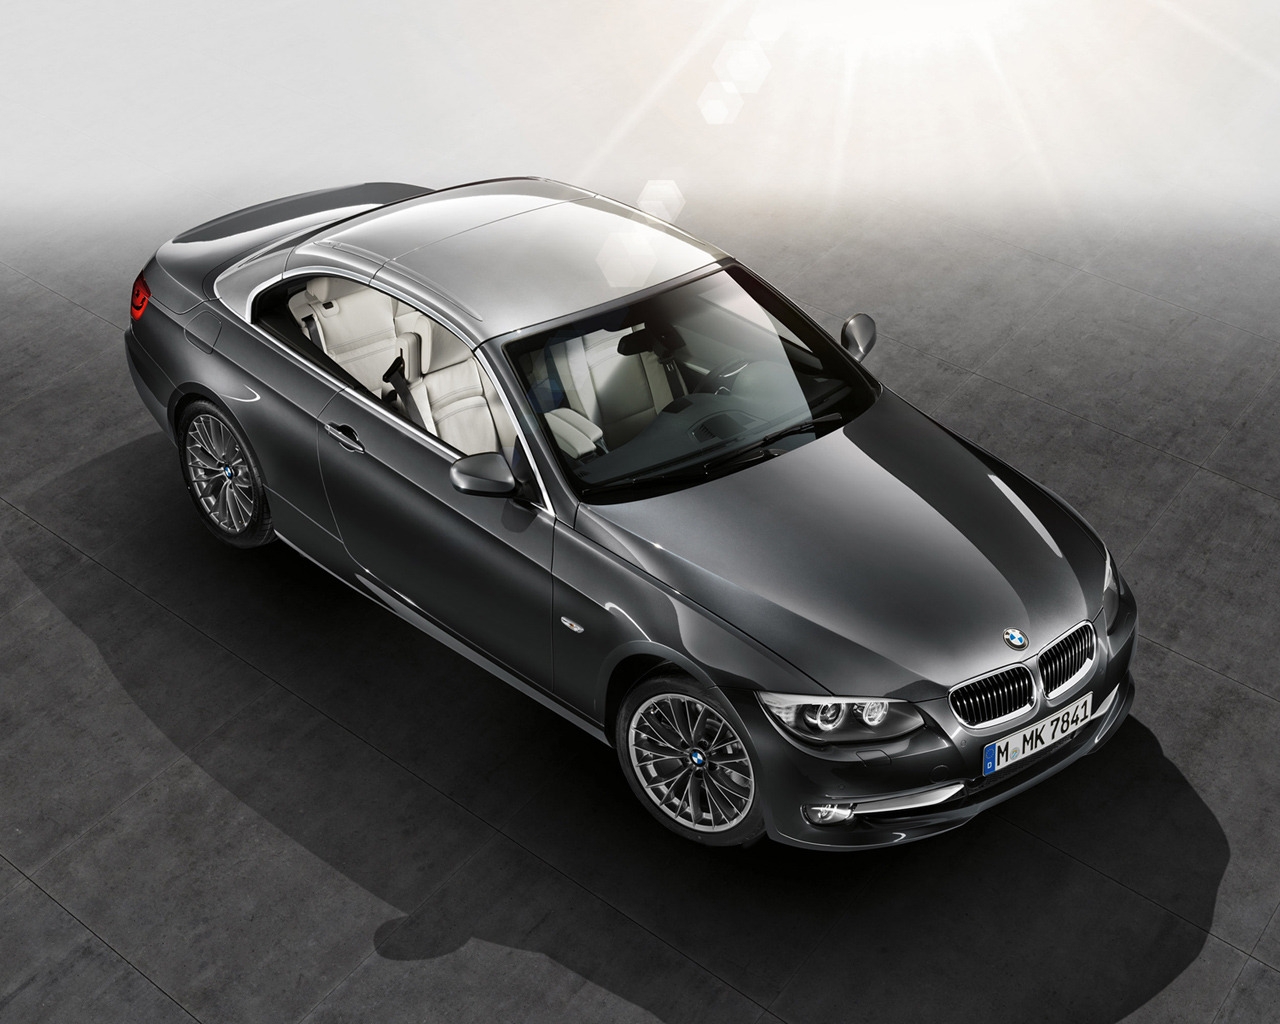 2012 BMW 3 Series Edition Exclusive for 1280 x 1024 resolution